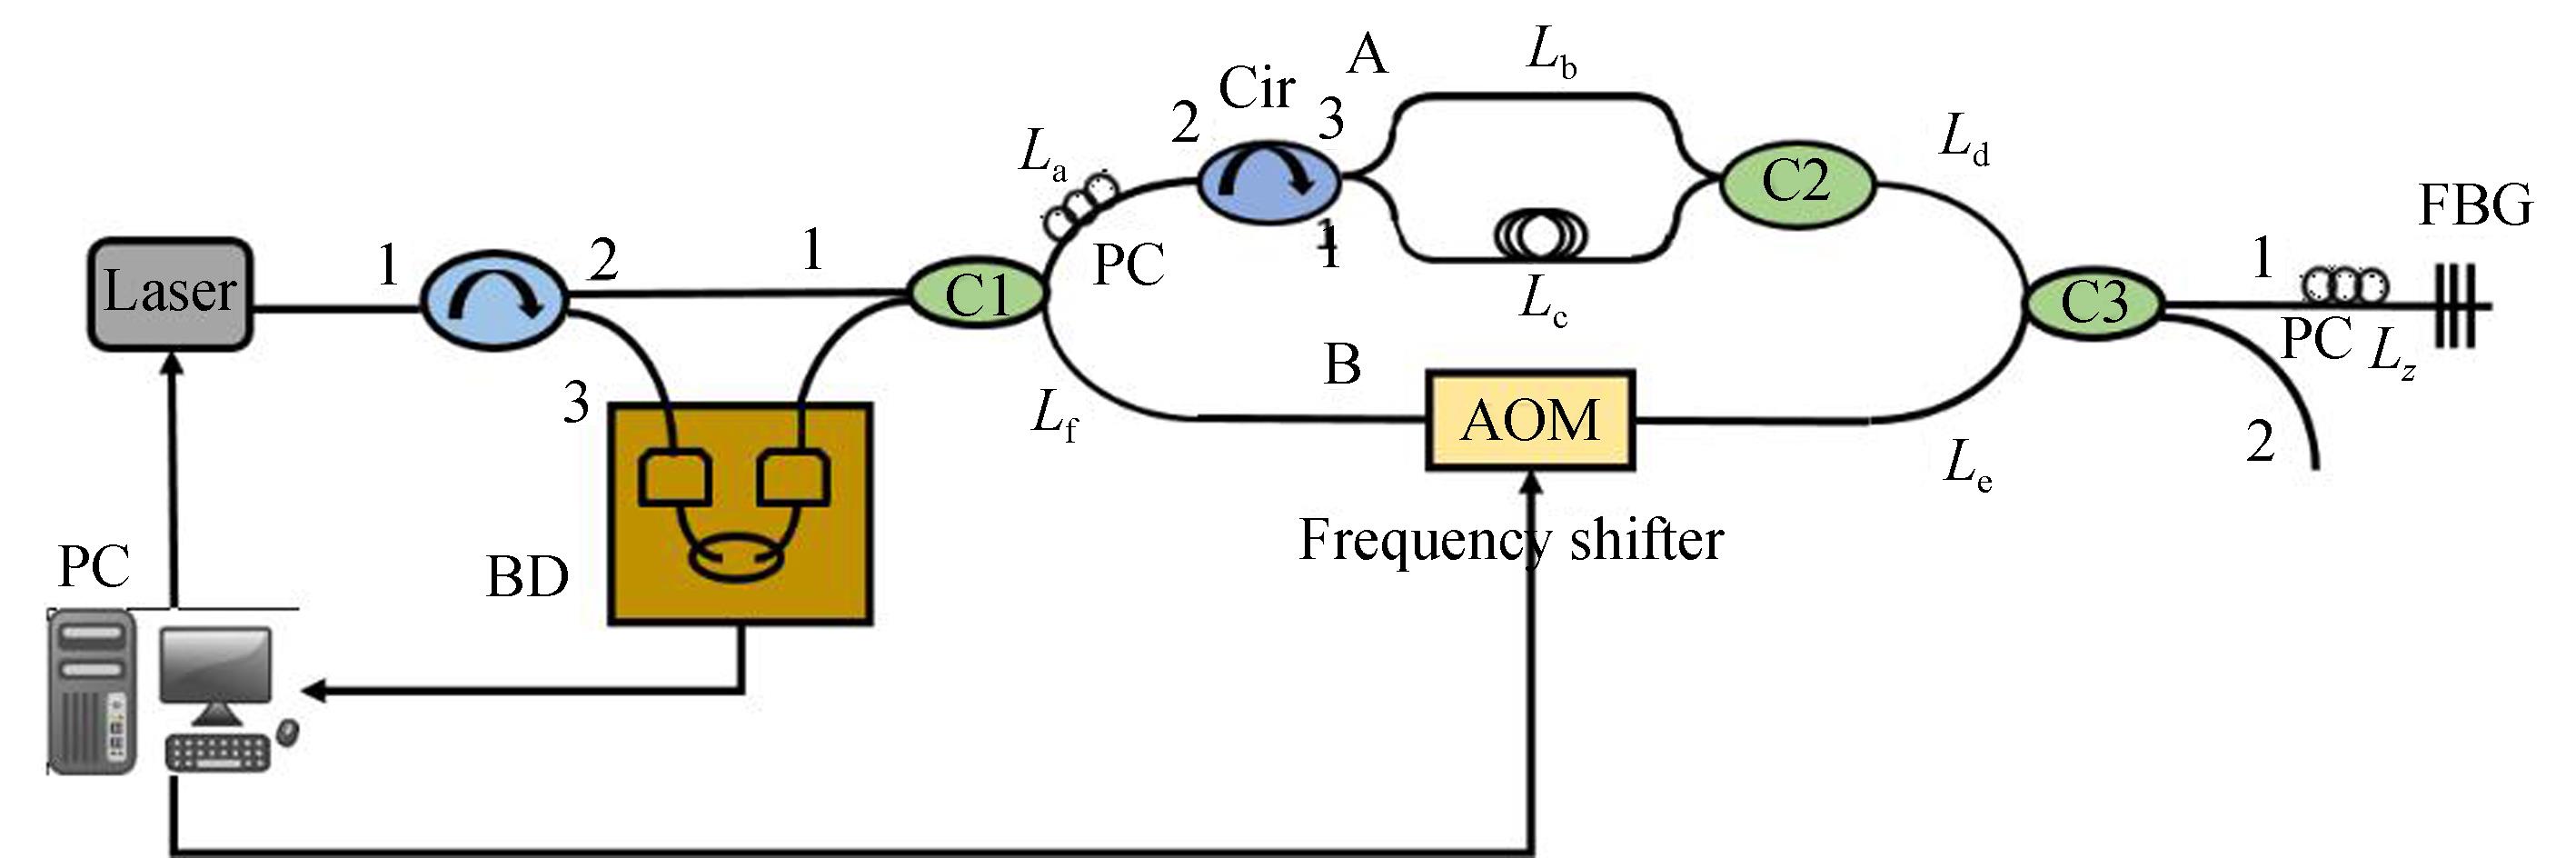 Modified frequency shift interference structure